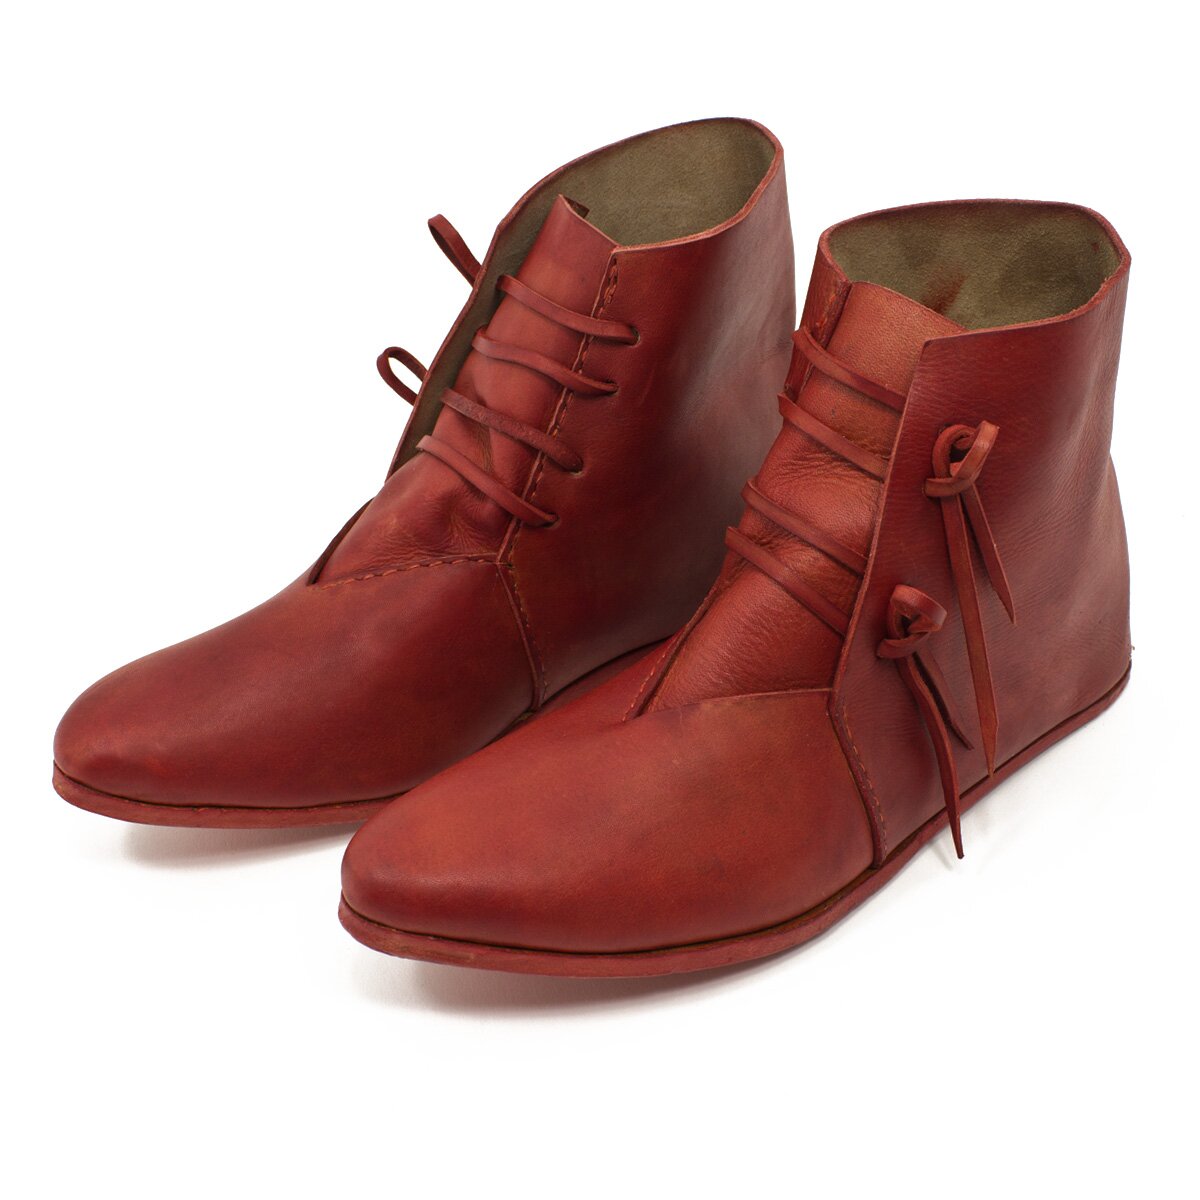 Medieval half boots Korduan red Size 38, 124,00